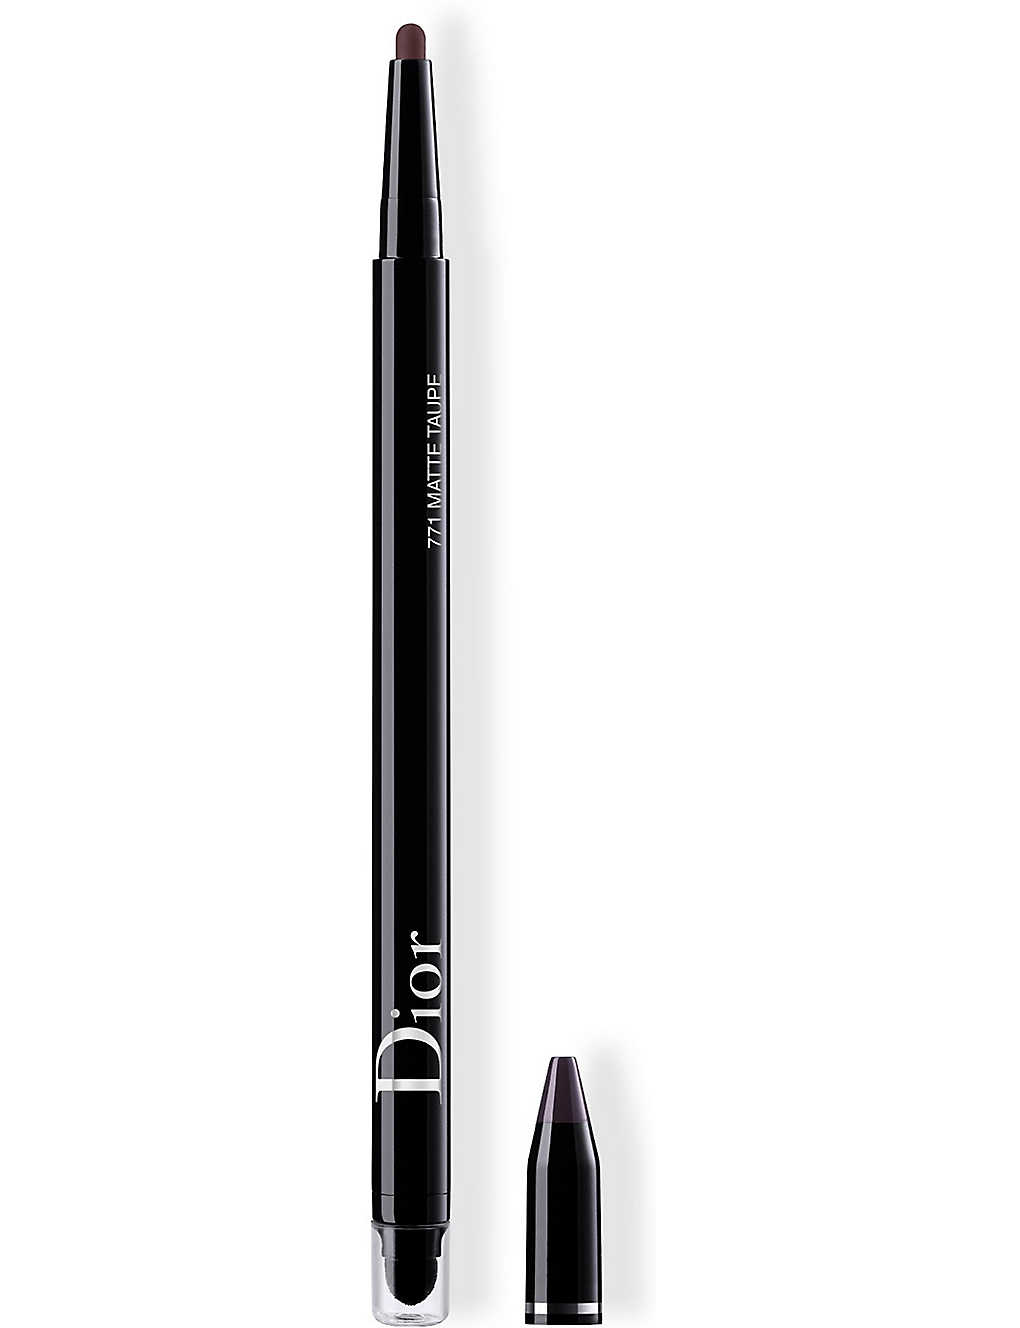 Dior Show 24h Stylo Waterproof Eyeliner 0.2g In 771 Matte Taupe